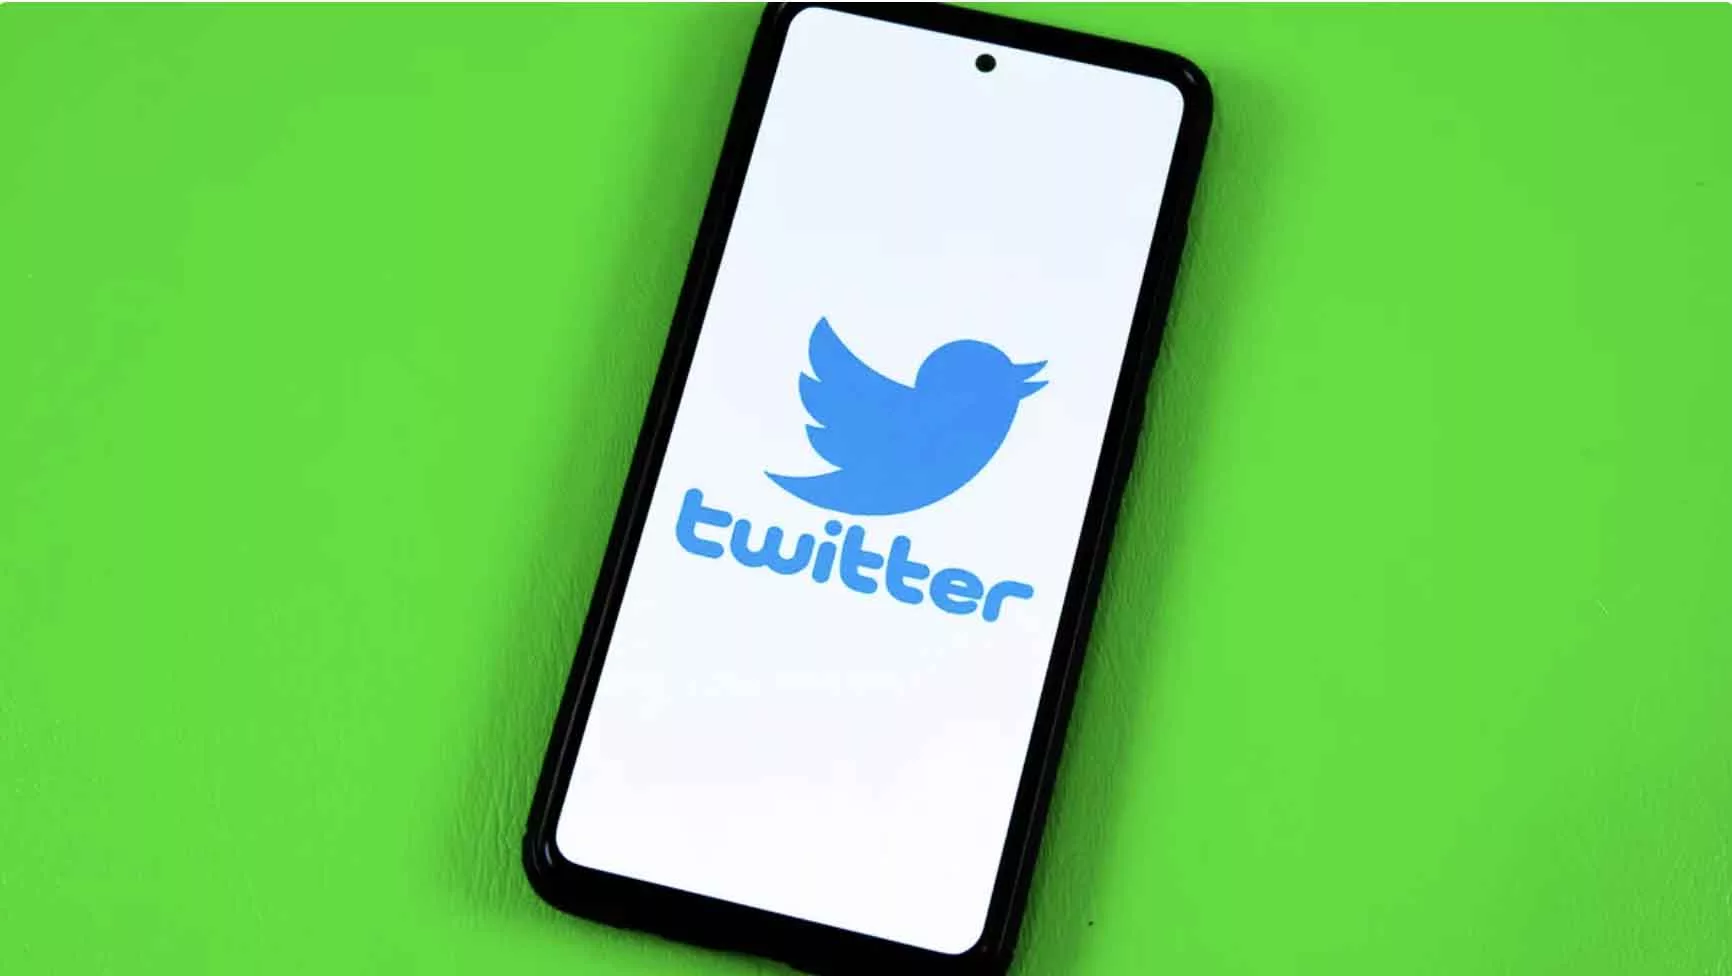 You may be able to control who mentions you on Twitter soon